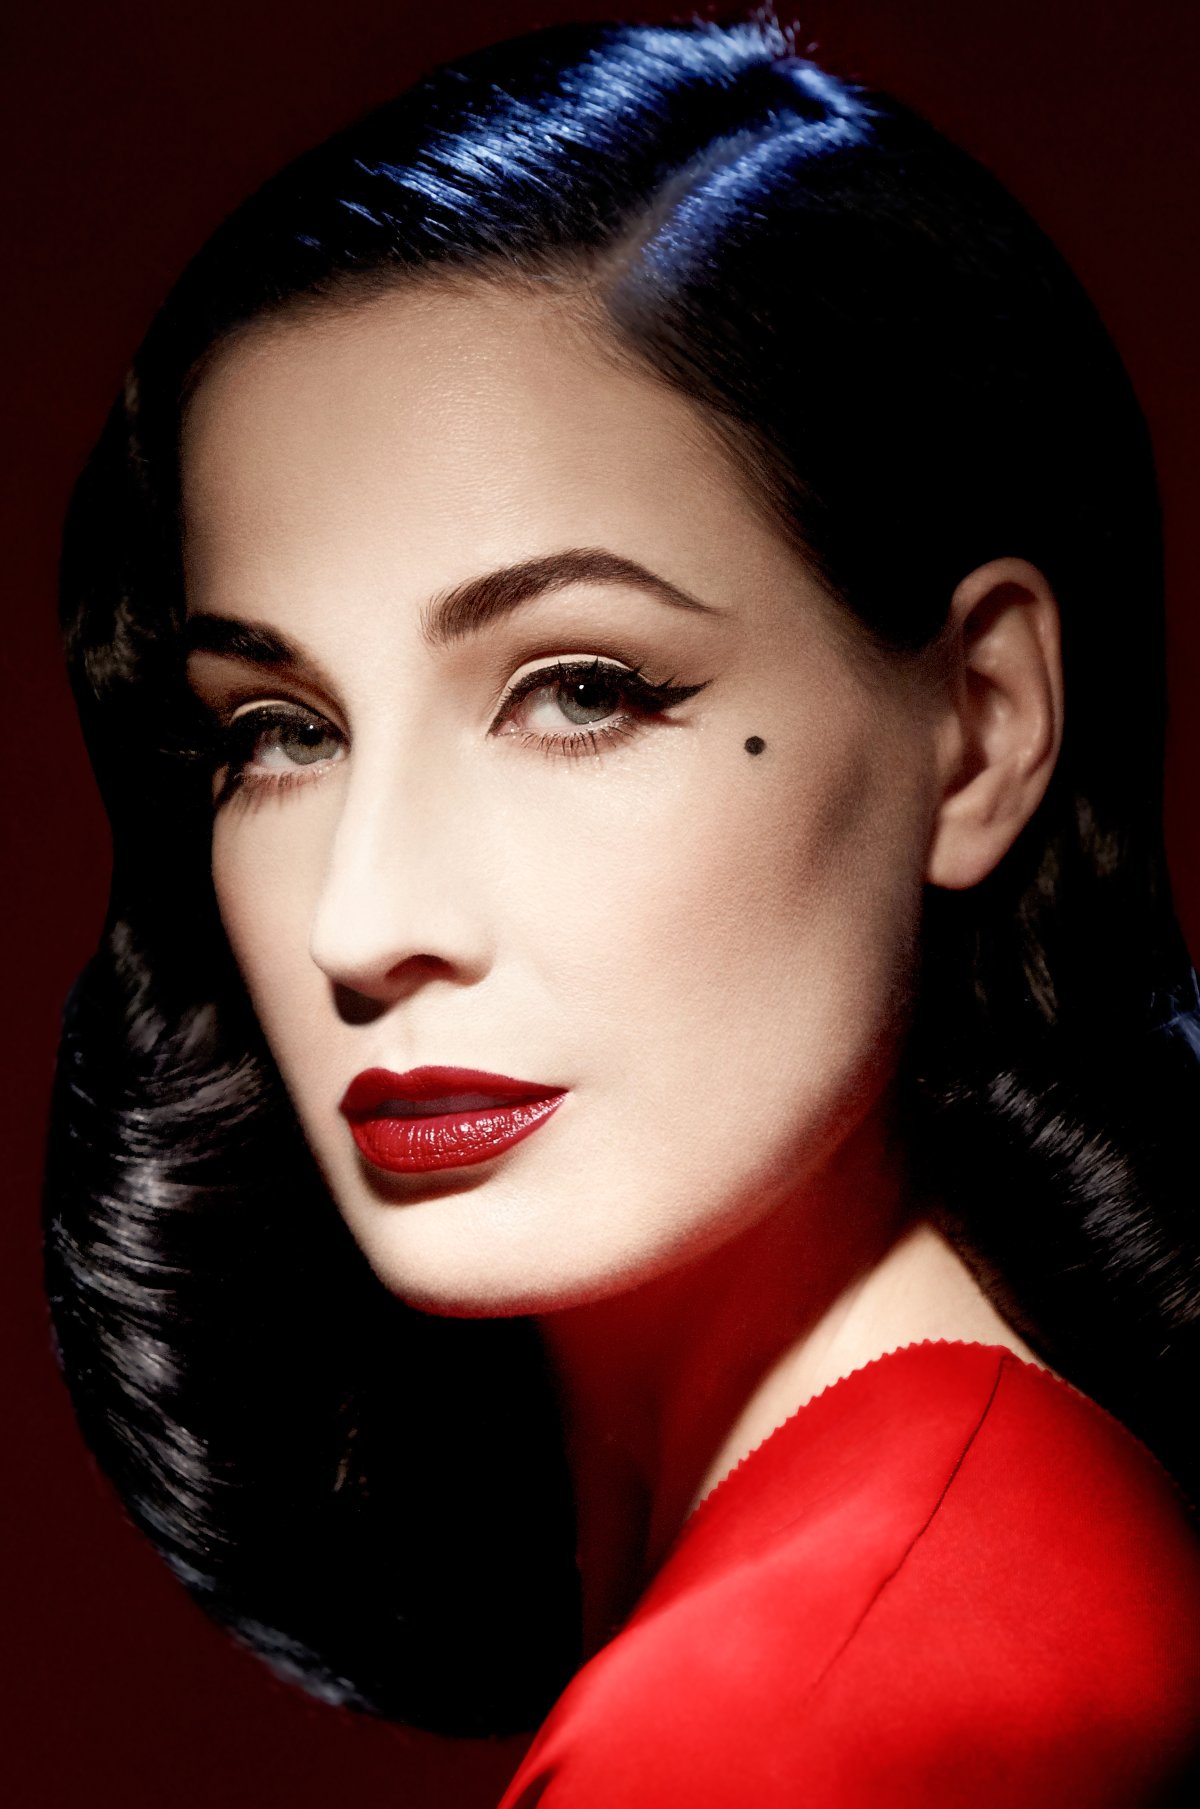 Dita Von Teese will be at the Gramcery Theatre for five nights. Photo by Ali Mahdavi